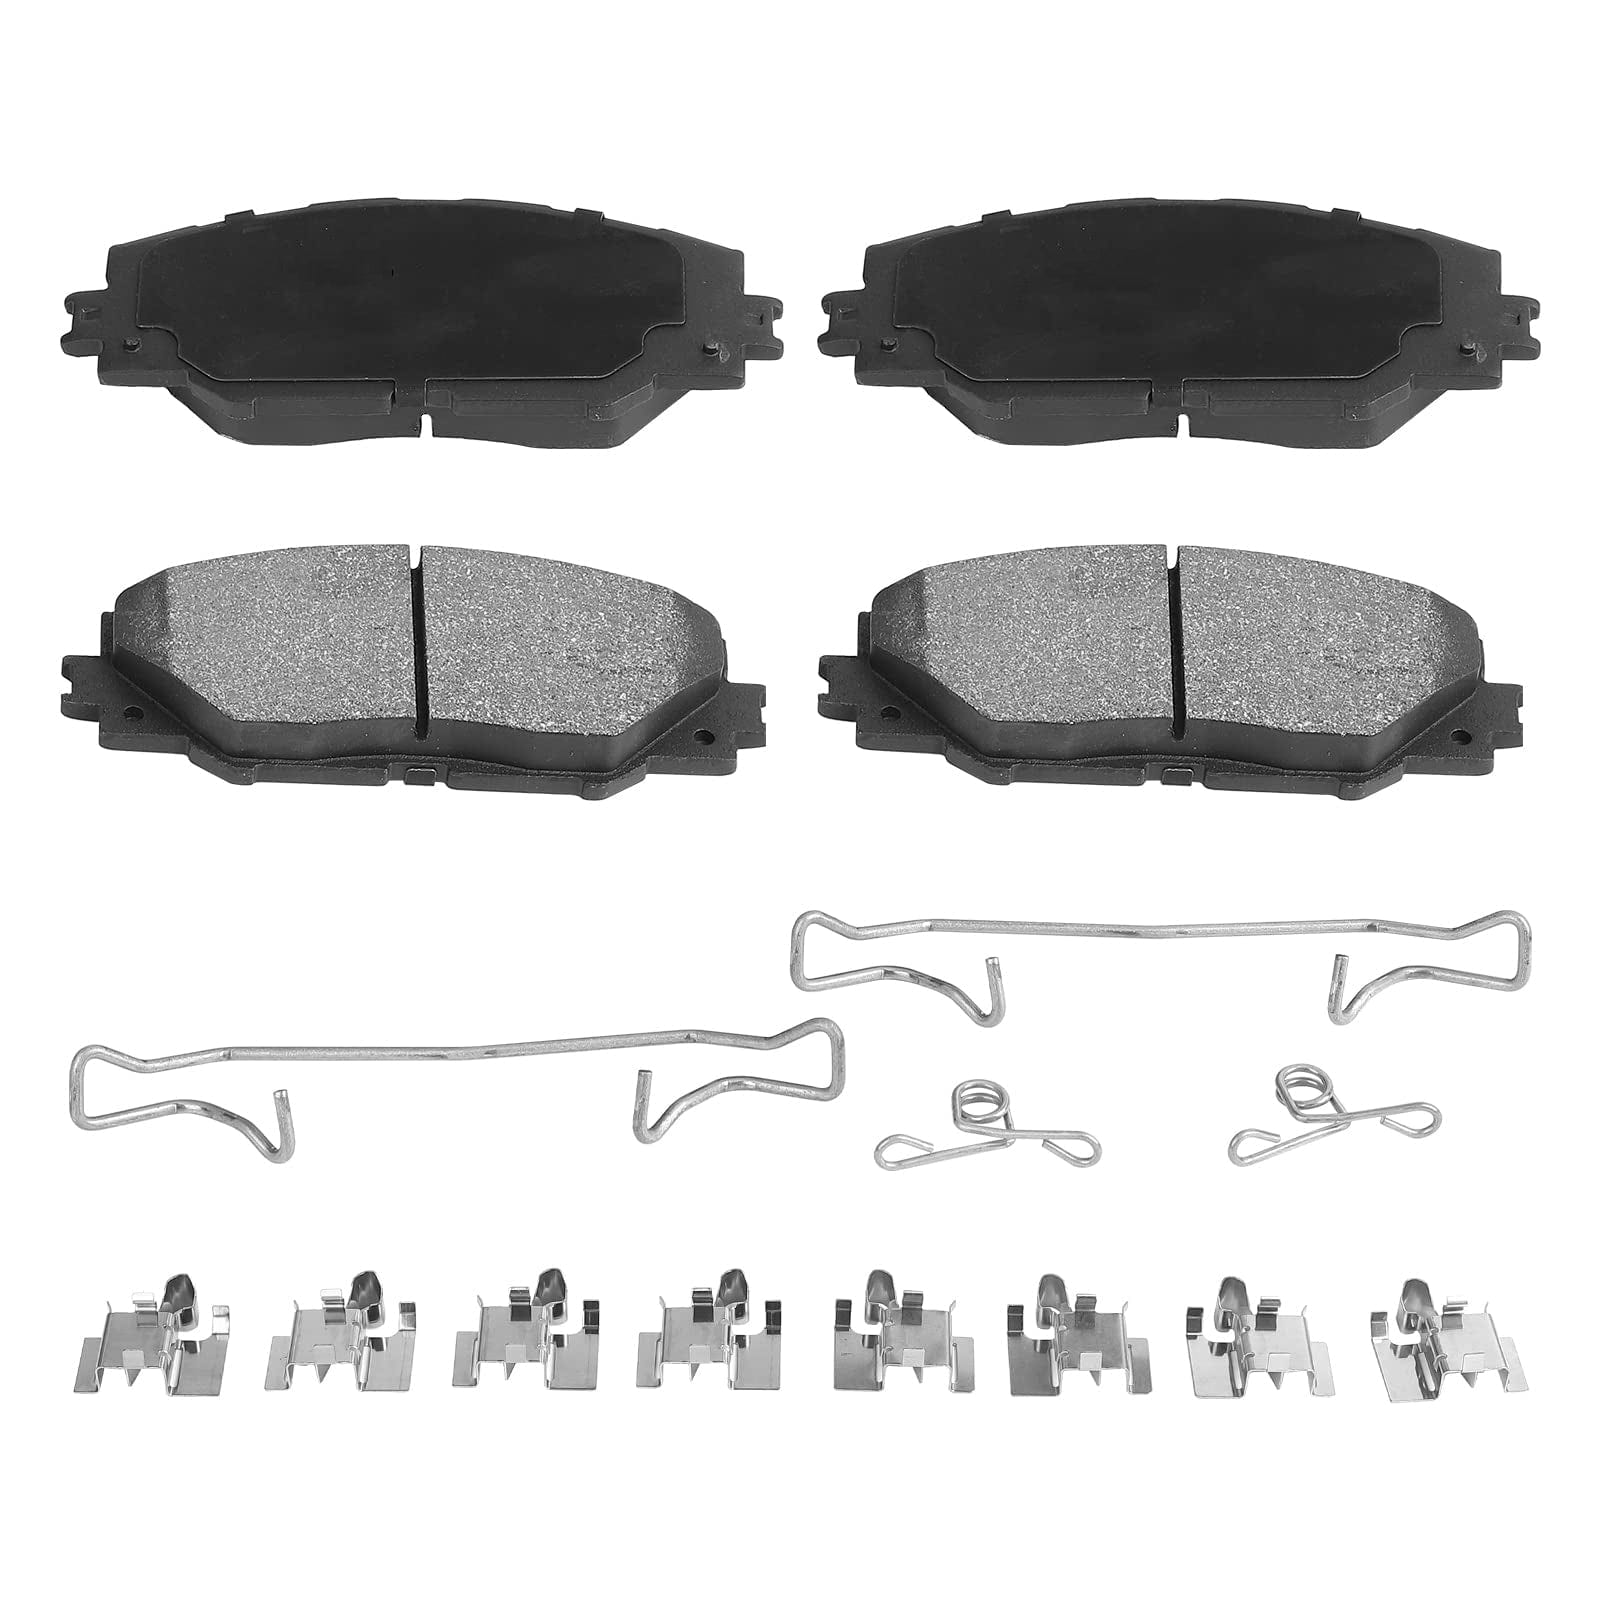 STP0487 Ceramic Front Pads for 97-99 CL, 90-02 Accord